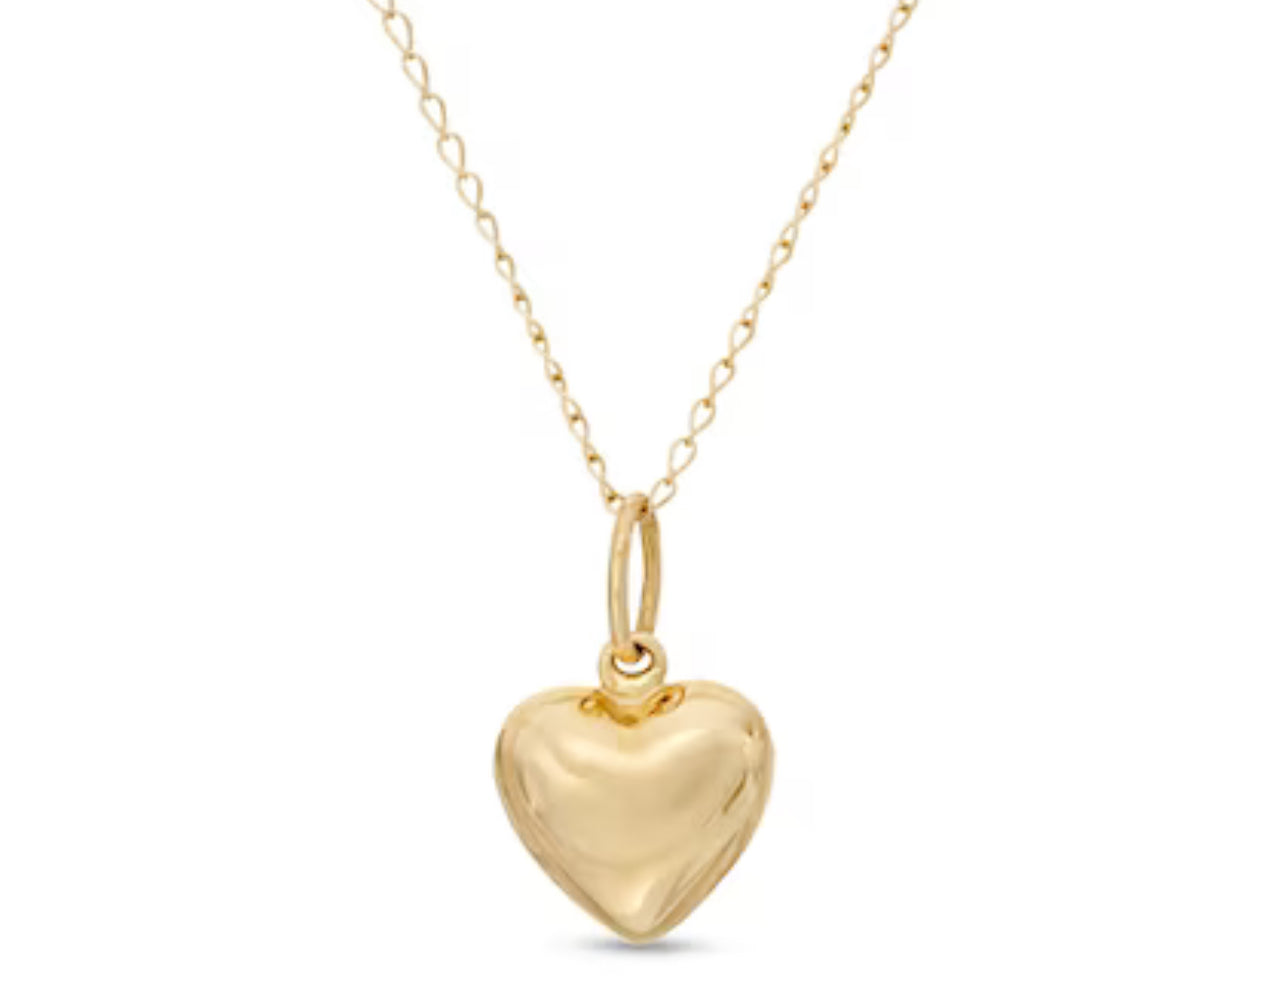 Child's Puffed Heart Pendant in 14K Gold - 13"